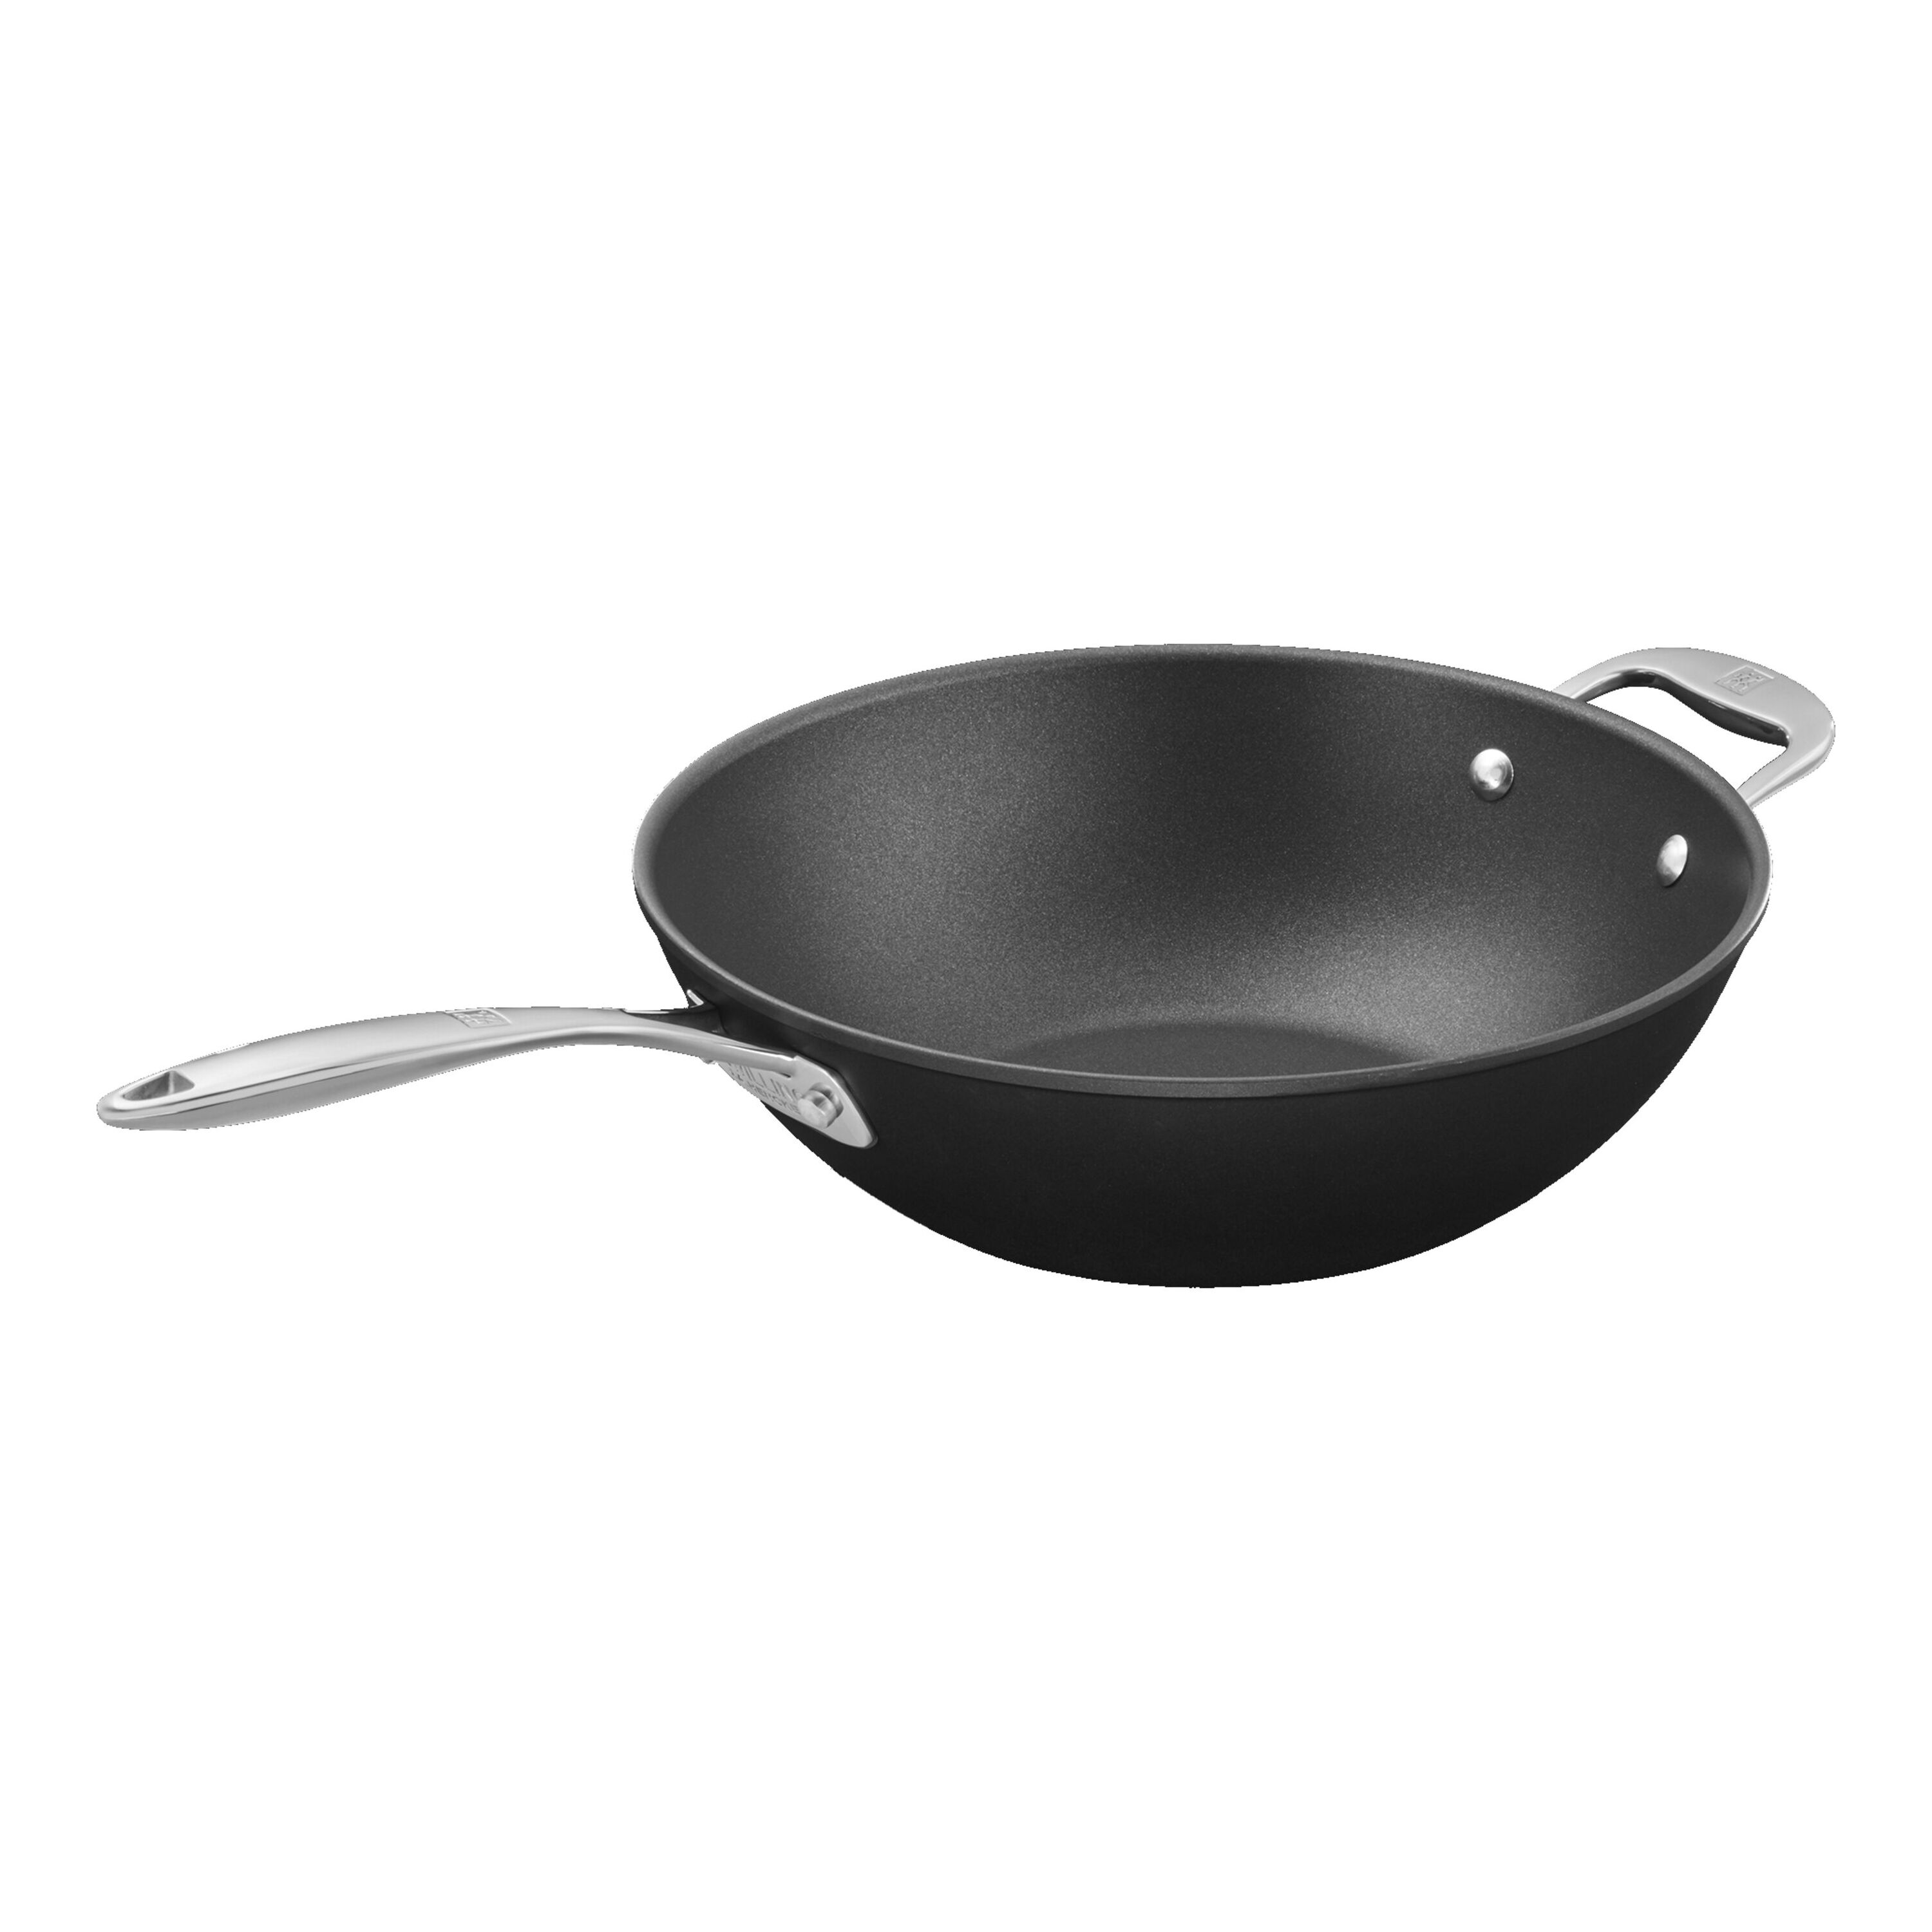 ZWILLING Forte 8-inch, aluminum, Non-stick, Frying pan